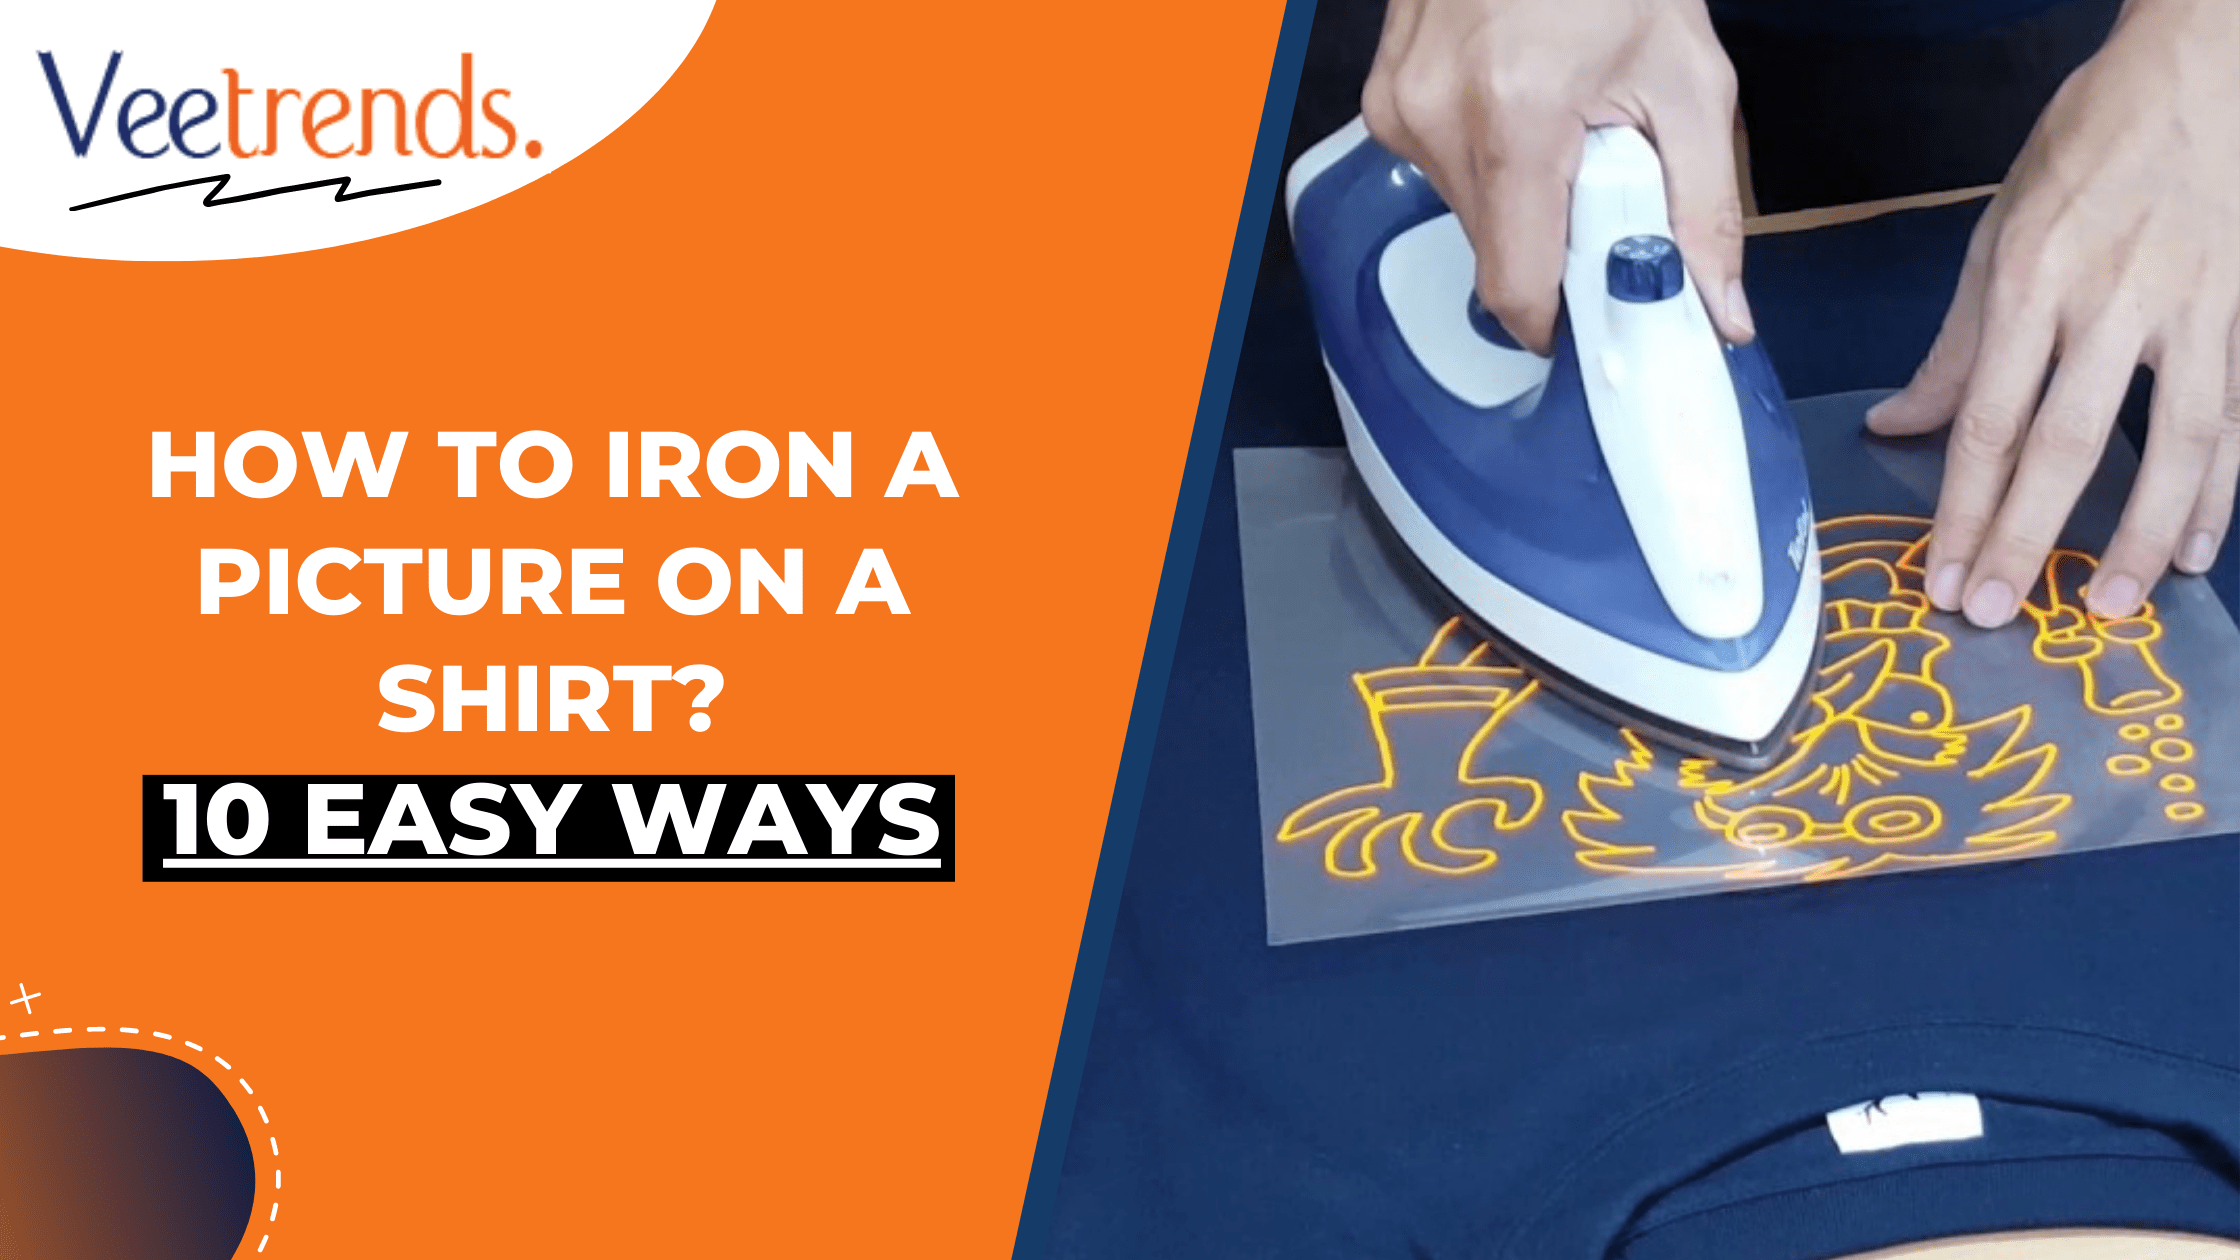 The 3rd method to remove iron on transfer paper printed on tshirt